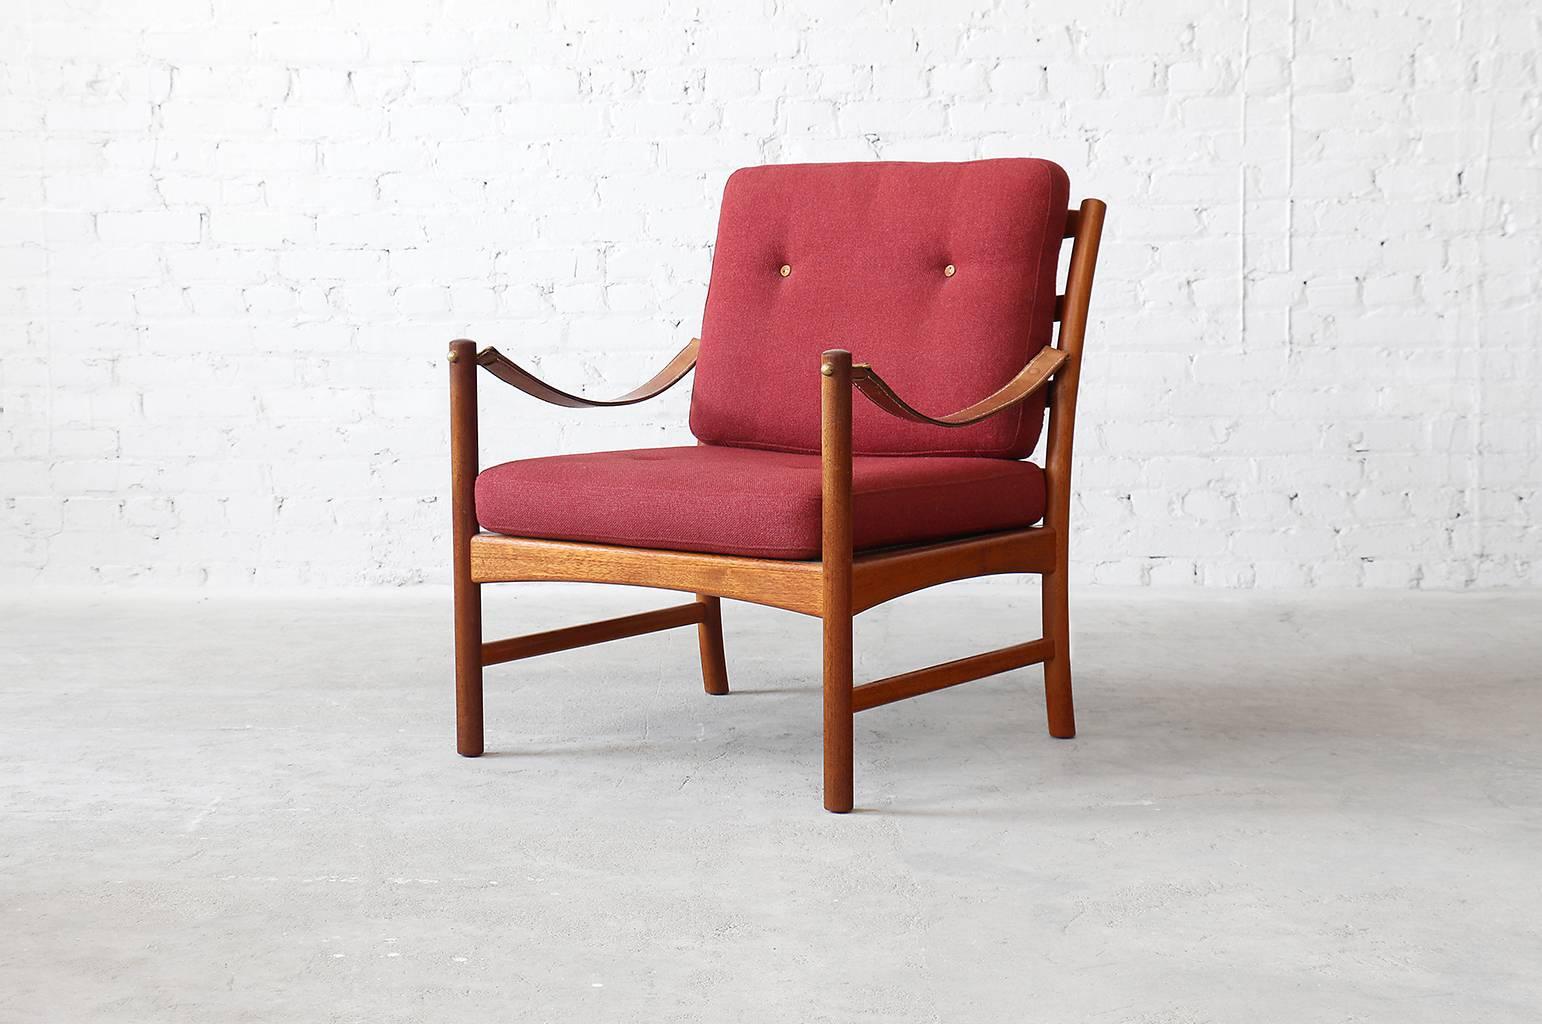 Rarely seen vintage easy chairs designed by Ejner Larsen & Aksel Bender-Madsen for Willy Beck. Executed in solid mahogany with leather armrests as seen on safari style chairs and red Danish wool. Purchased directly from Willy Beck in 1971 by